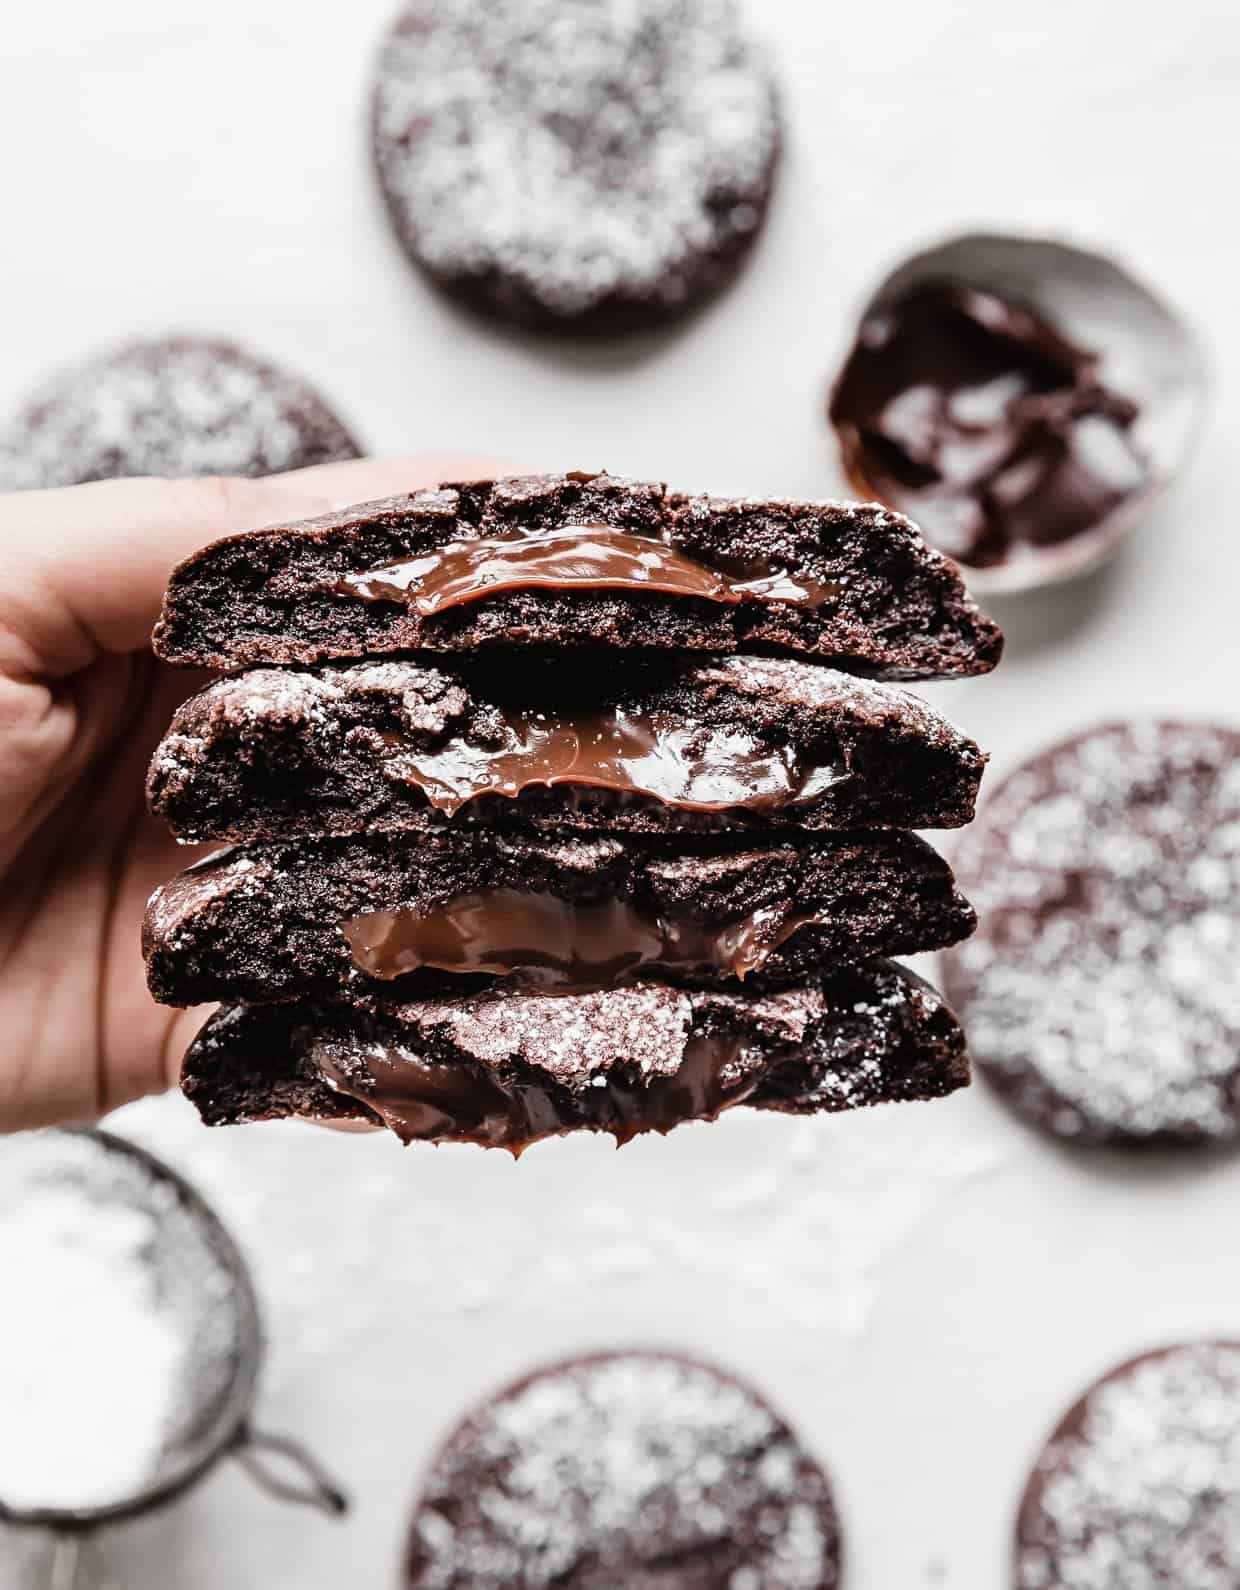 A hand holding four chocolate molten lava cookie halves, with hot fudge oozing from the centers of each half.